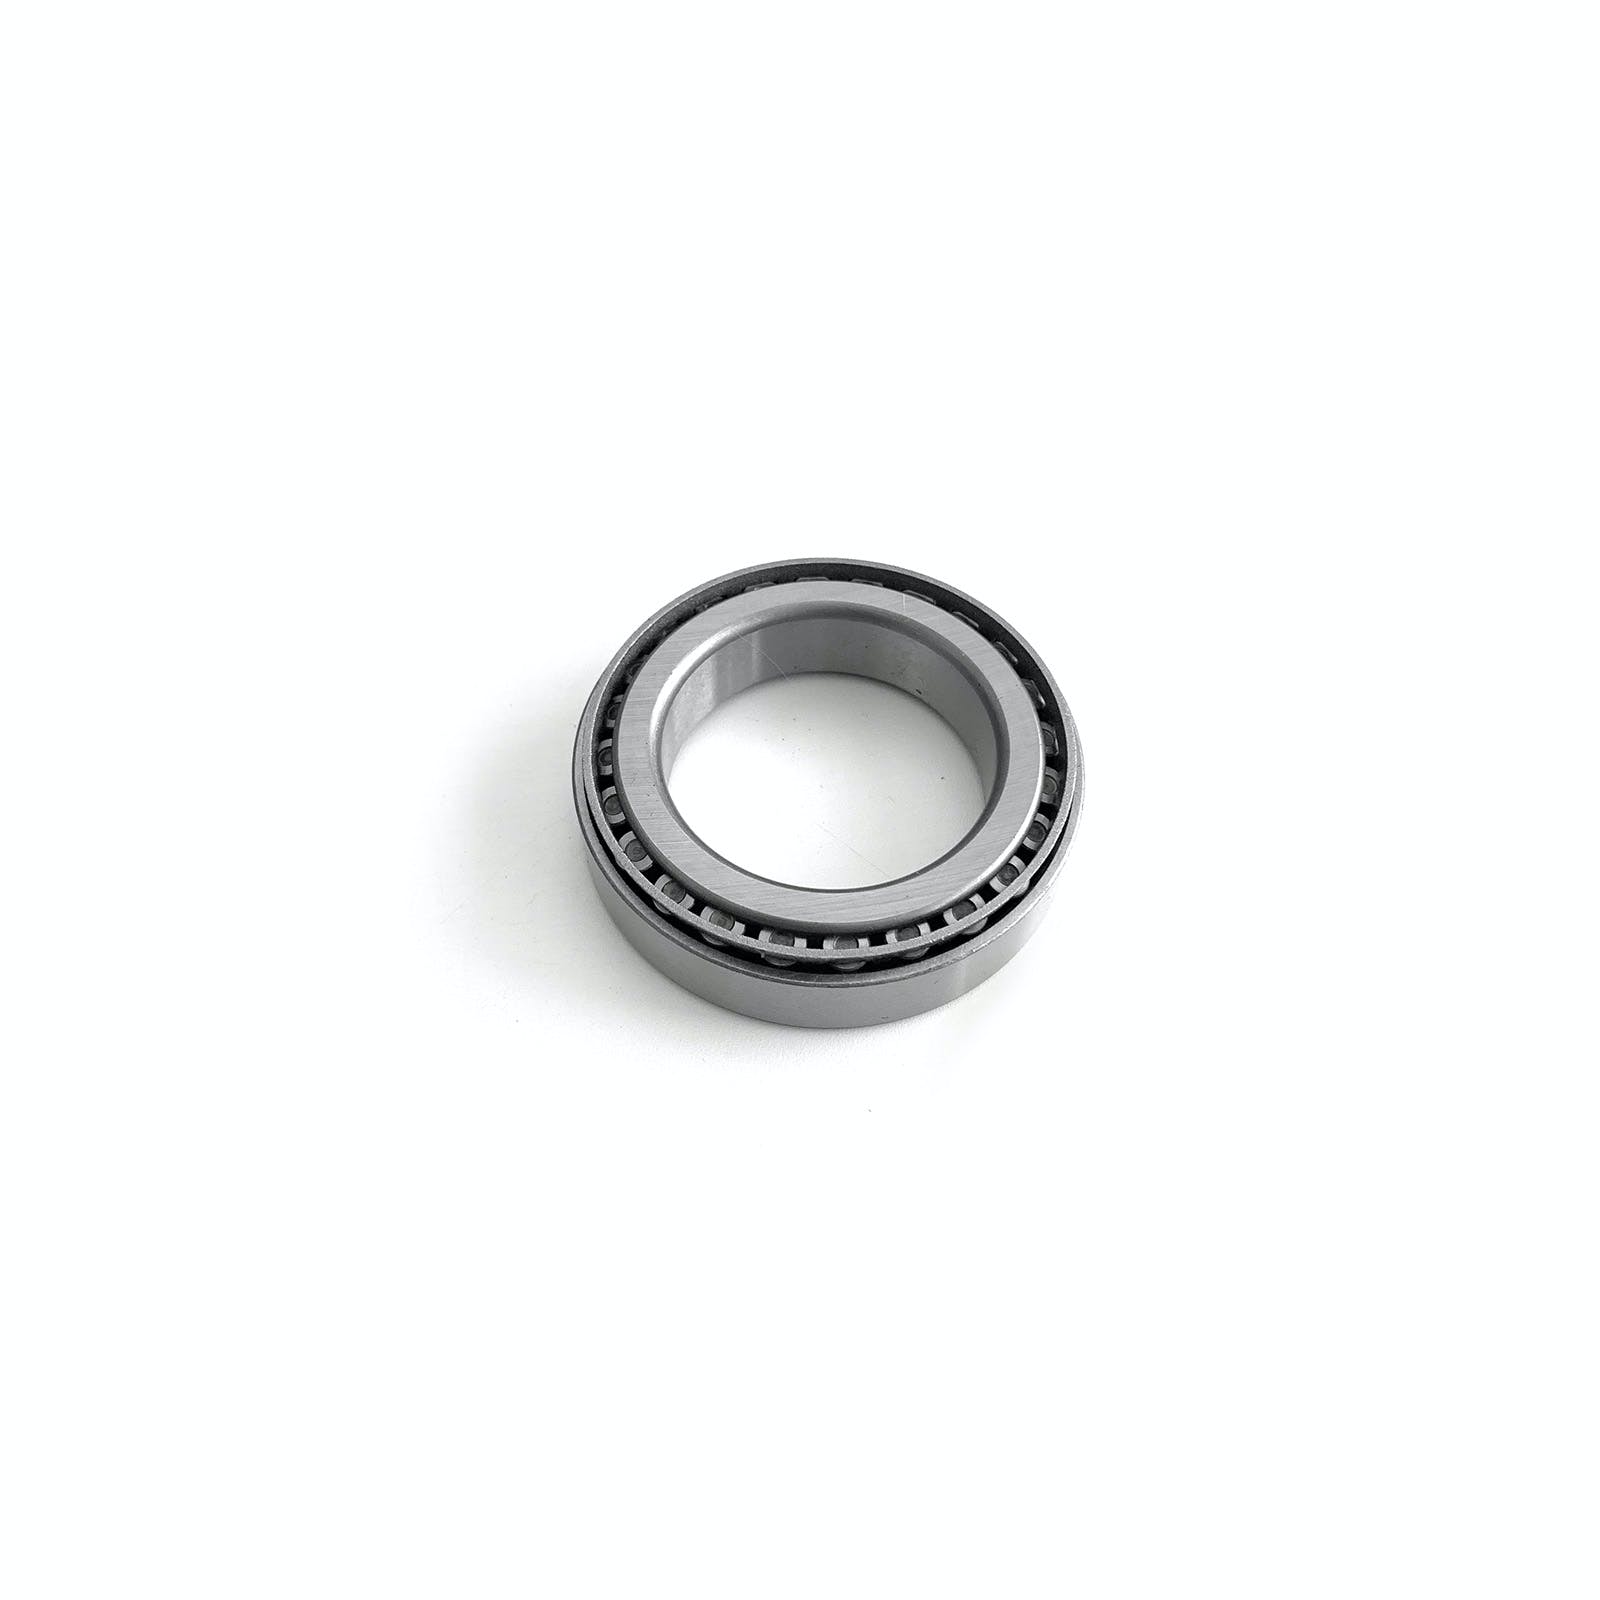 Speedmaster PCE203.1005 9 Conversion Carrier Bearings to suit 35 Spline into 3.062 Case